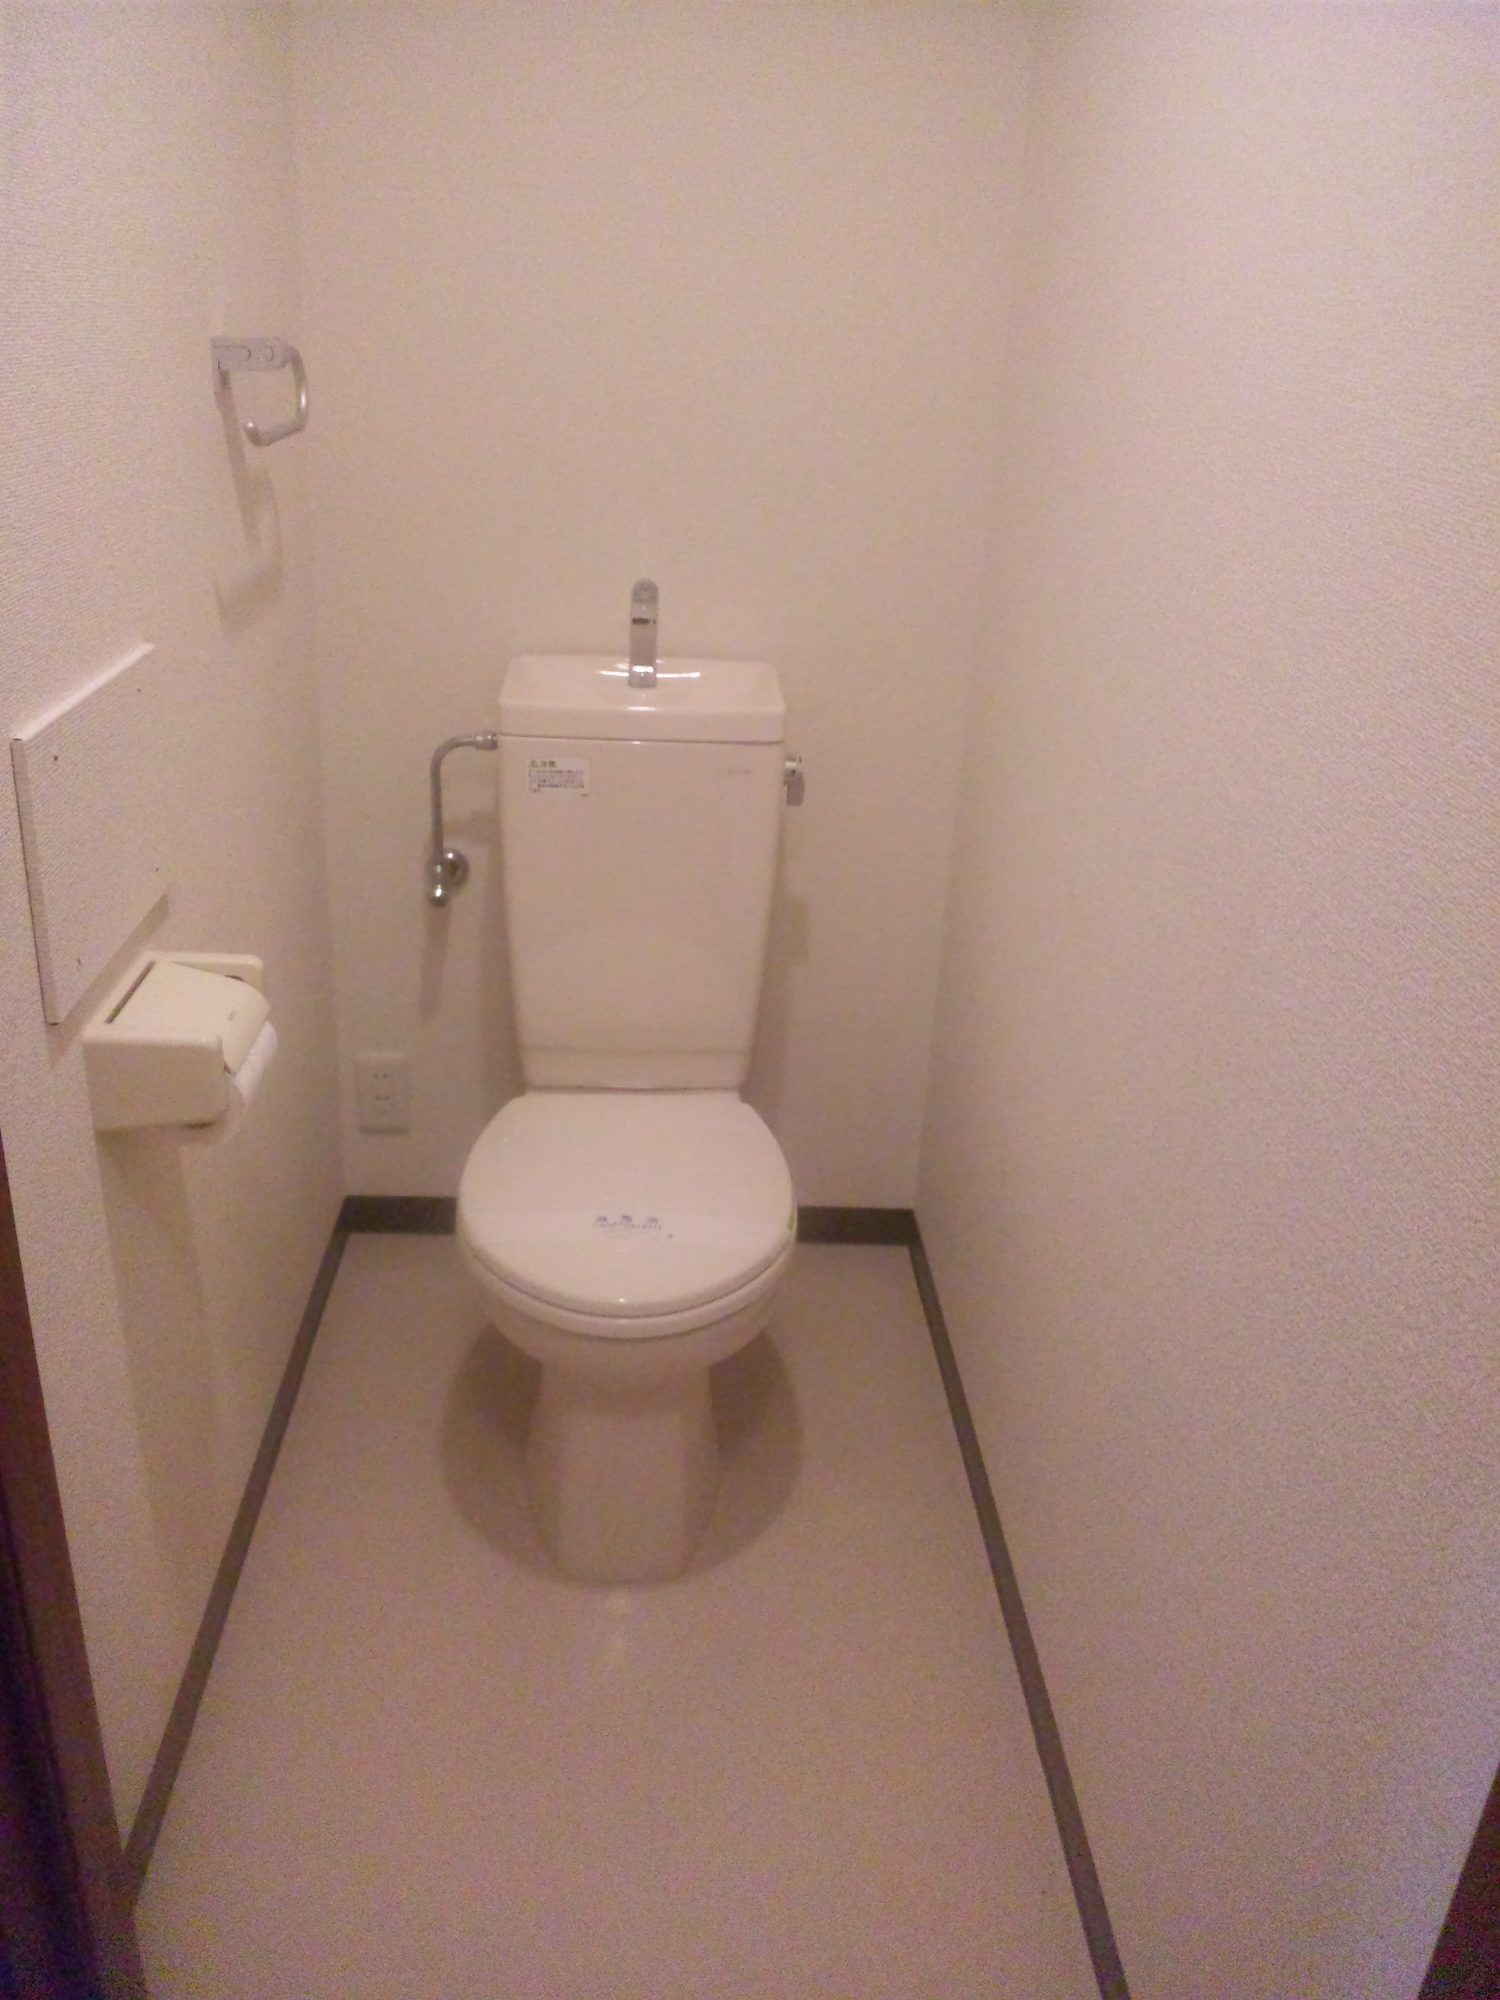 Toilet. Dare is your toilet Moto for corporate contracts often.